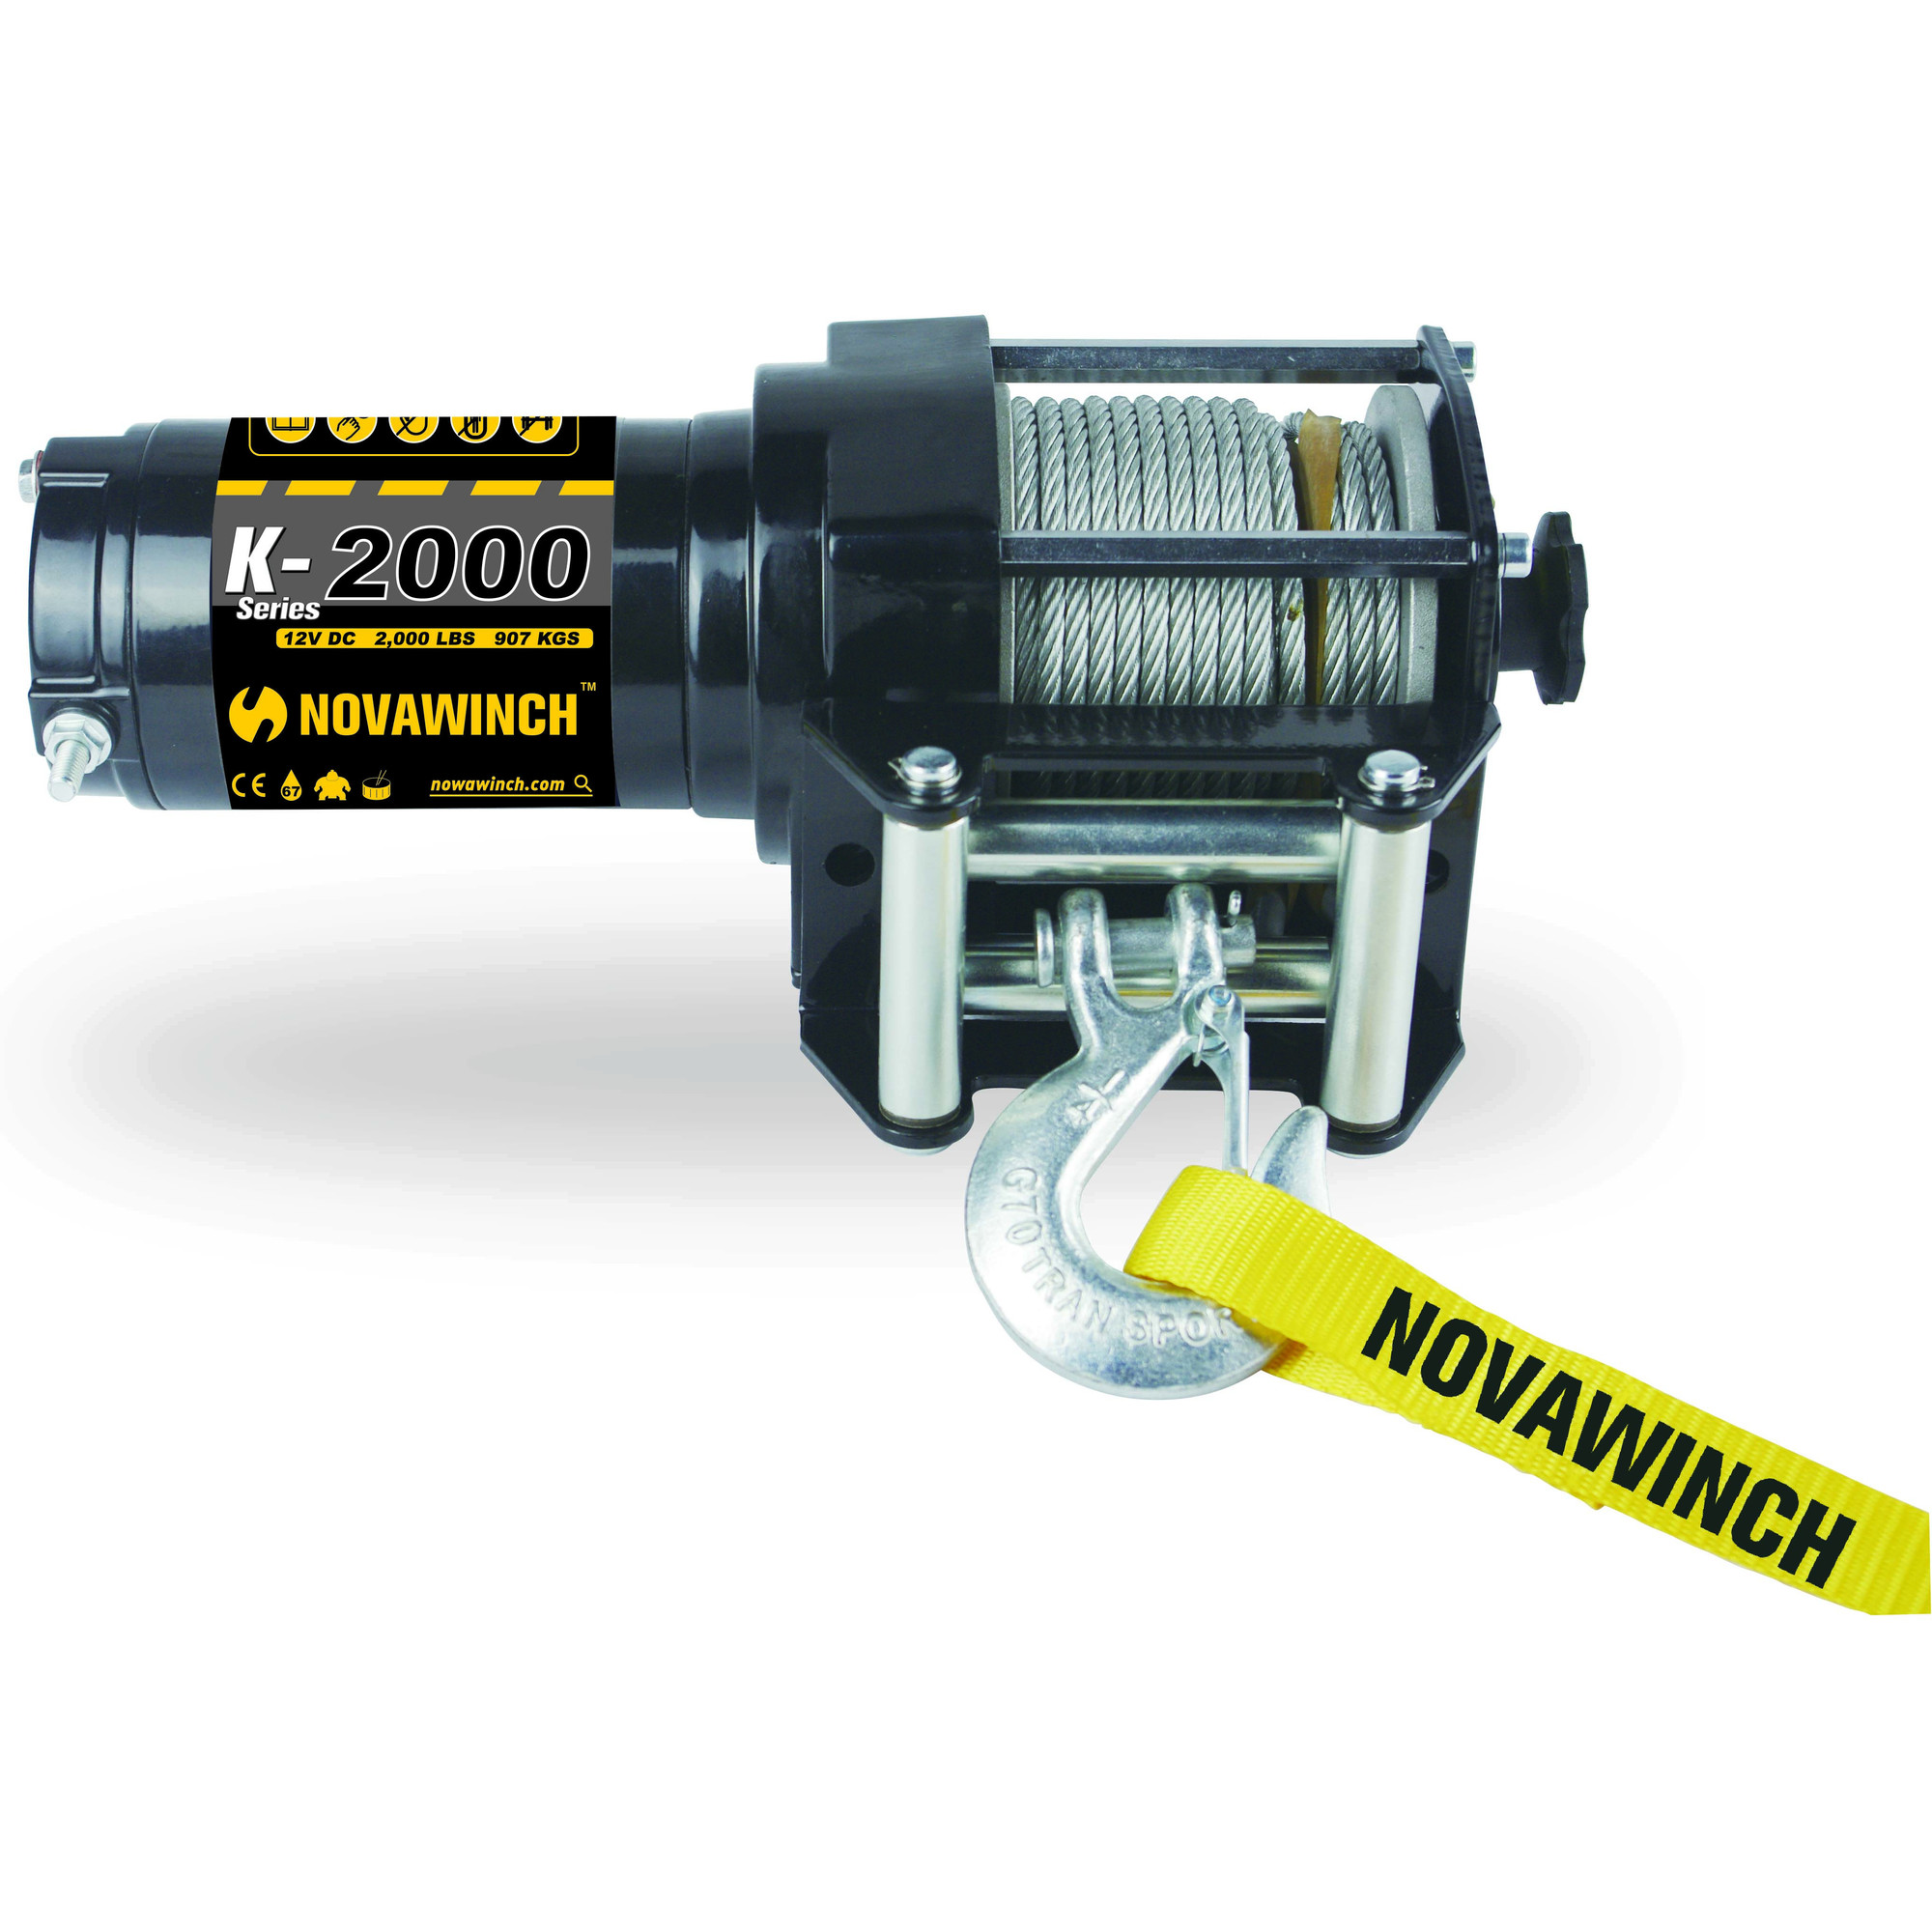 Novawinch, Utility 12V DC Powered Winch, Capacity (Line Pull) 2000 lb, Volts 12, Max. Amps 120, Model 701001068567